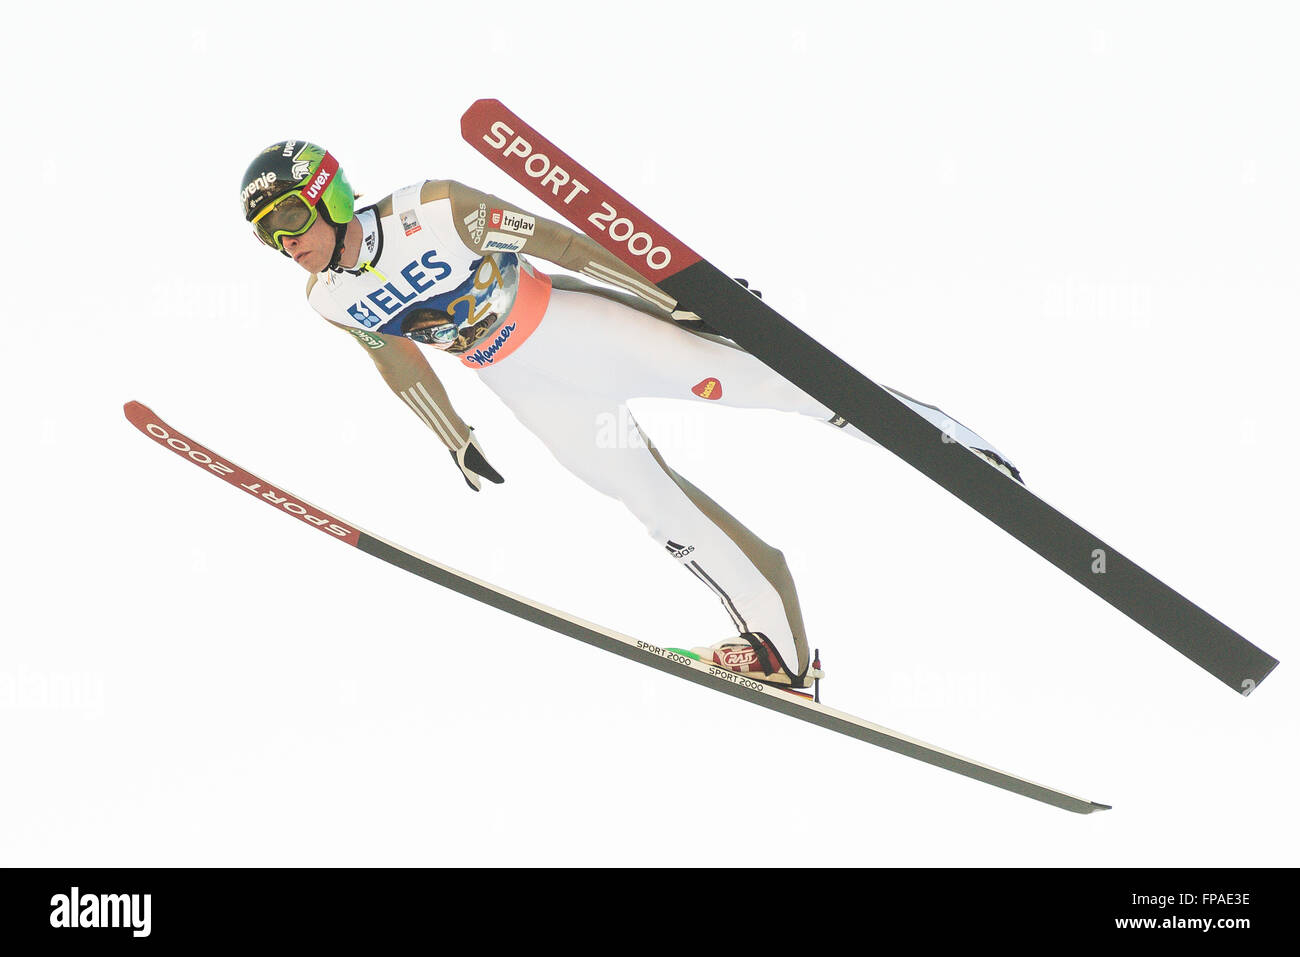 Planica, Slovenia. 18th Mar, 2016. Kento Sakuyama of Japan competes during Planica FIS Ski Jumping World Cup finals on the March 18, 2016 in Planica, Slovenia. © Rok Rakun/Pacific Press/Alamy Live News Stock Photo